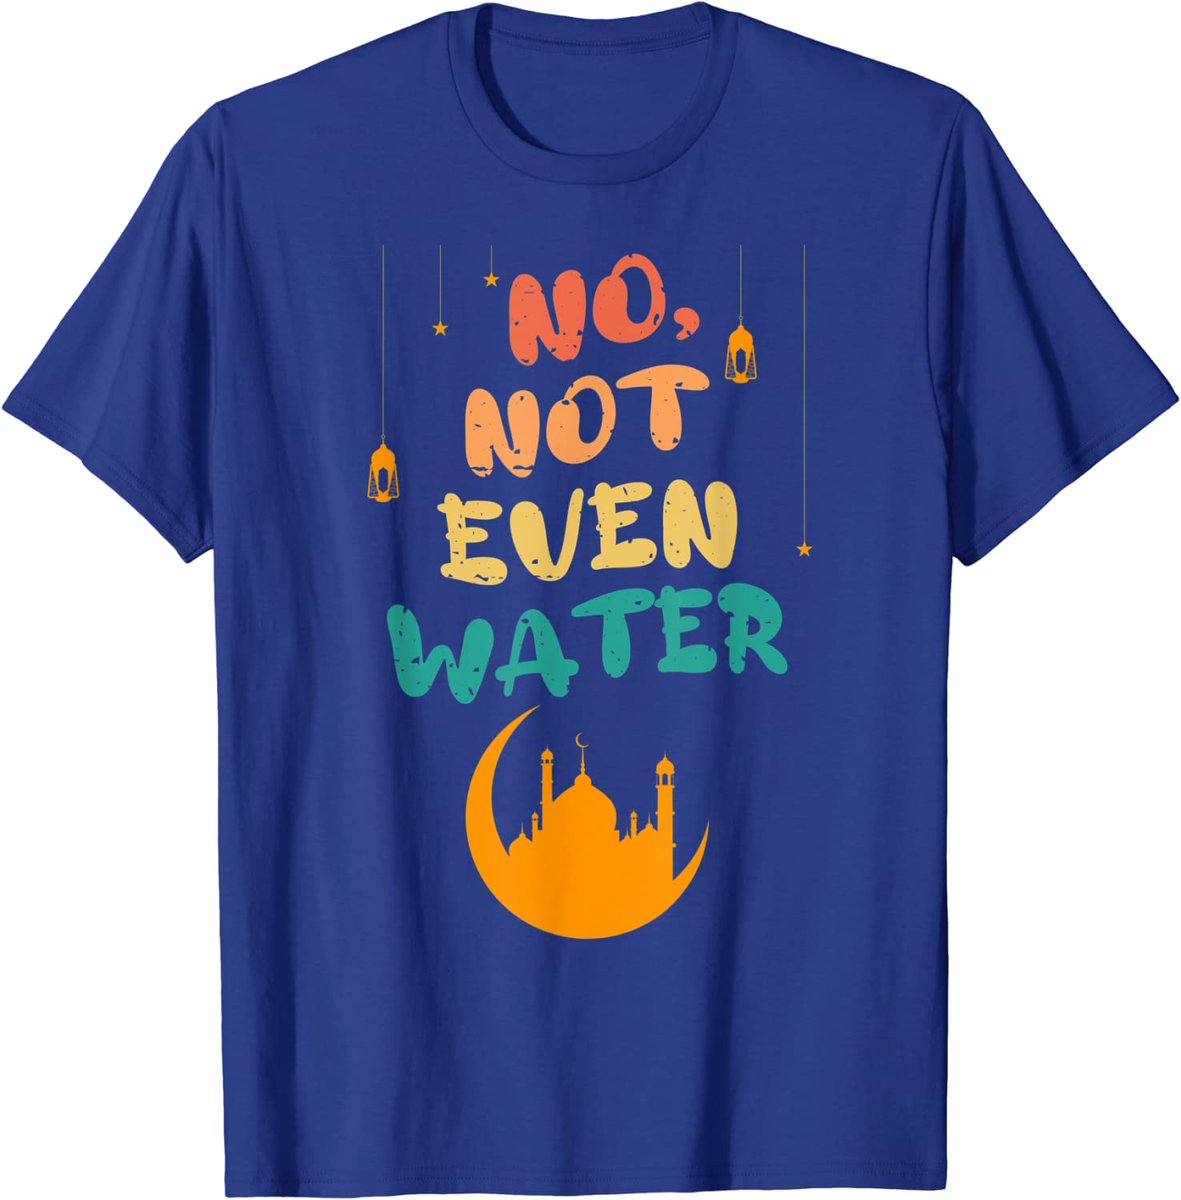 Cool Islamic Fasting Quote Ramadan Kareem Lover T-Shirt check it out here: bit.ly/3n4tAbH
#shirts #Outerwear #professional #casualwear #Flannel #clothing #clothes #giftforhim #giftideas #flannelshirt #flannel #boyfriendshirt #flannelmurah #kemejamurah #flanneleightyeight